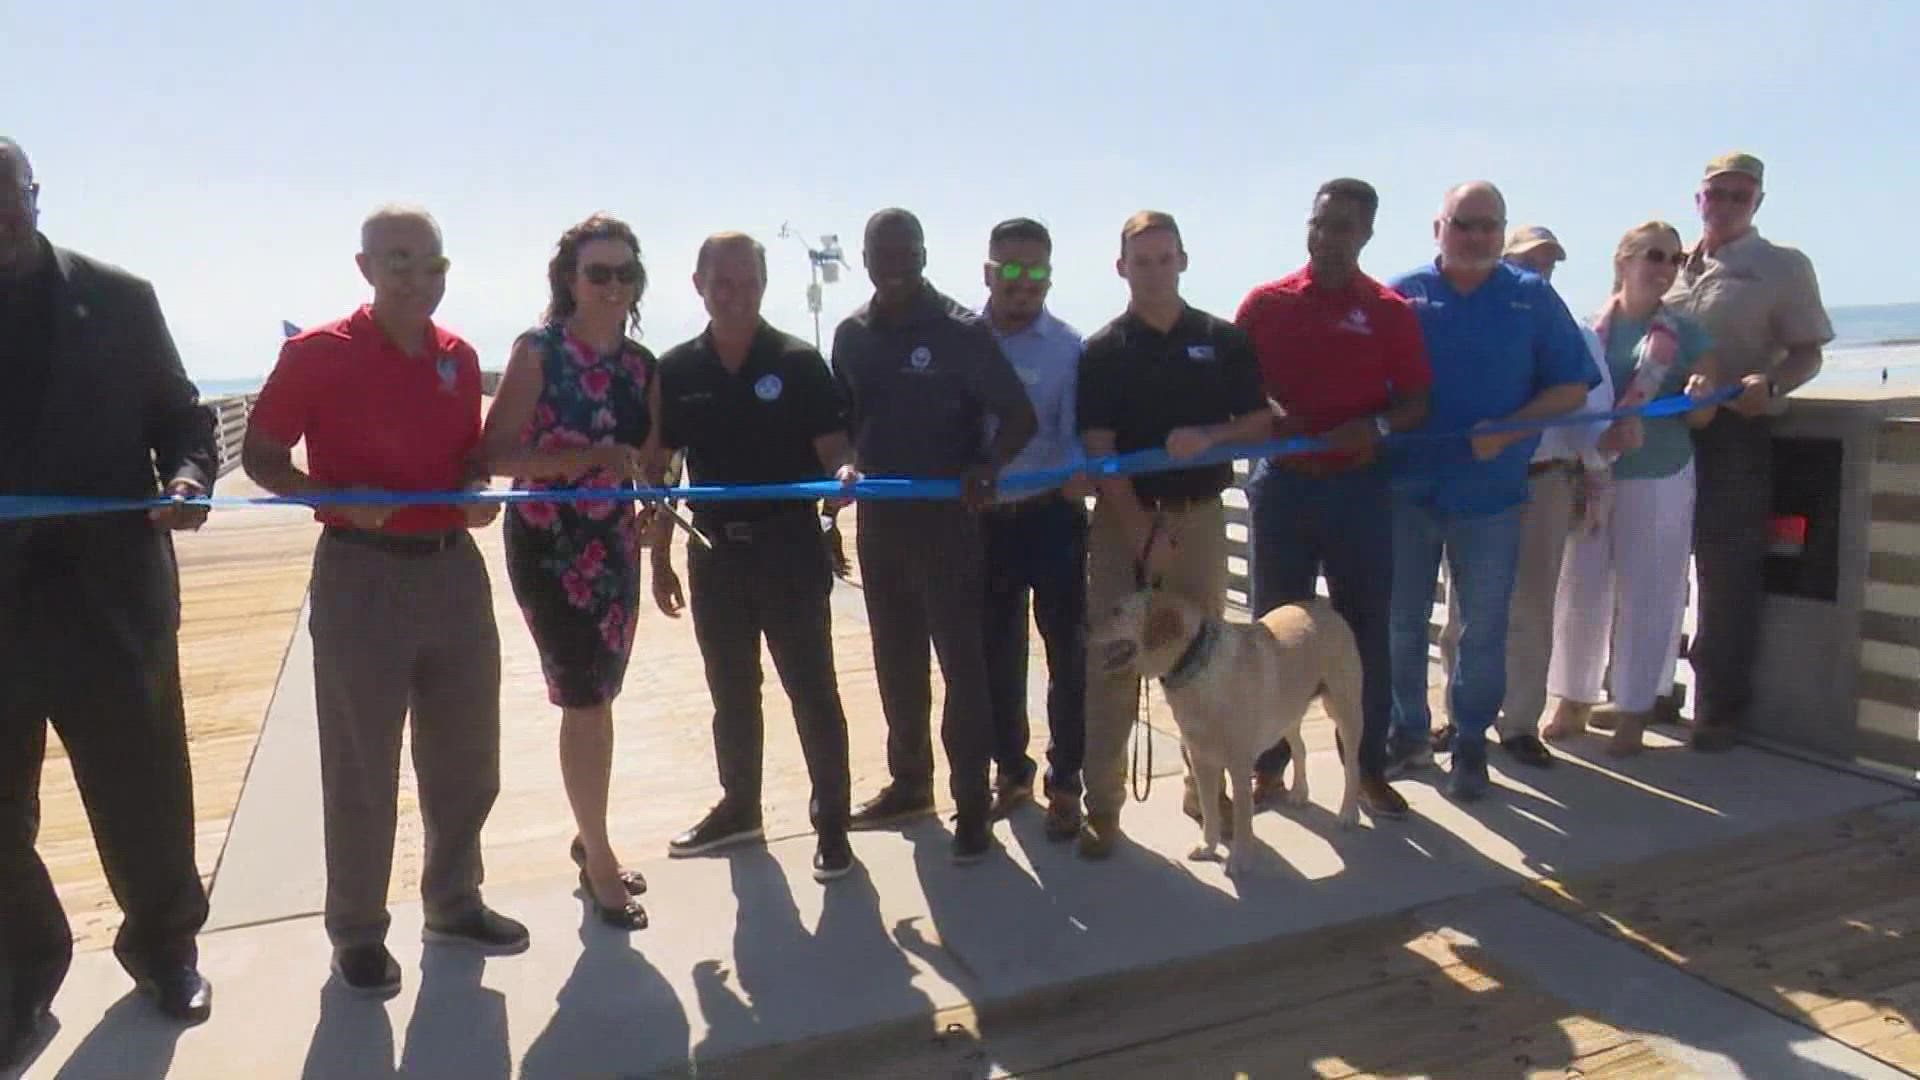 Mayor Lenny Curry and Mayor Christine Hoffman broke out a pair of ceremonial scissors for the ribbon cutting to re-open Jacksonville Beach Pier.